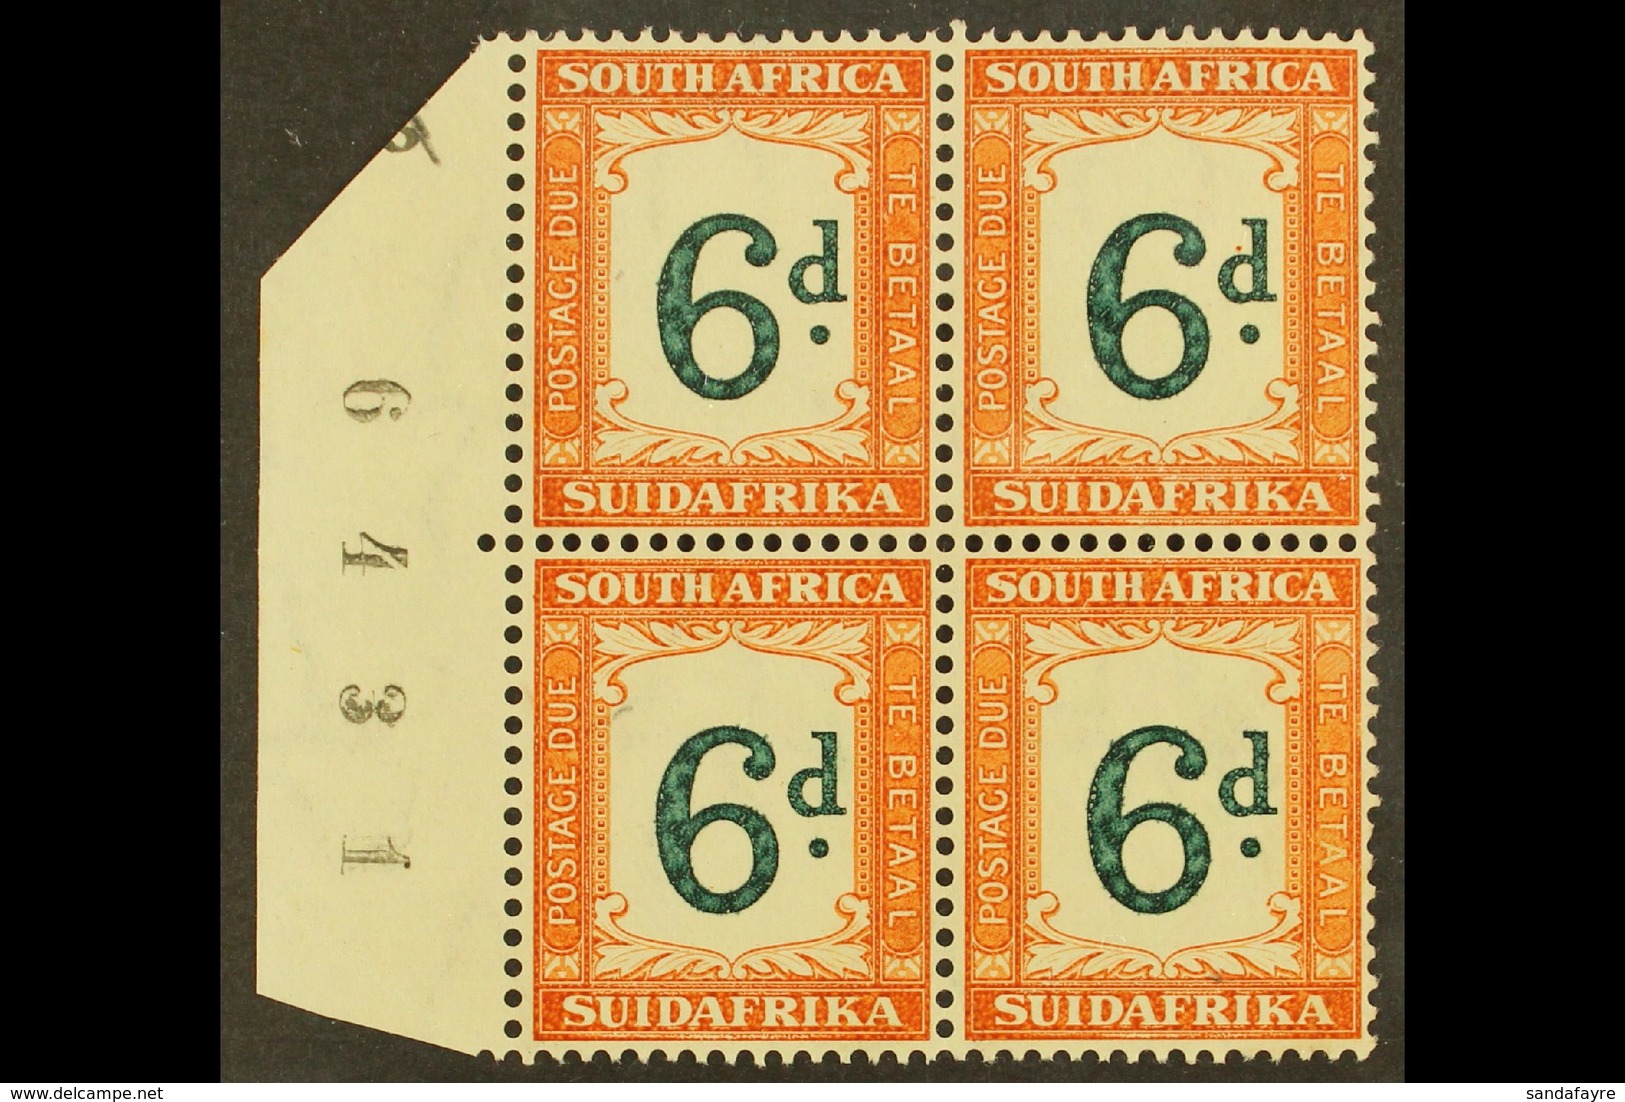 POSTAGE DUES 1932-42 6d Green & Brown-ochre, SHEET NUMBER Block Of 4, SG D29a, Never Hinged Mint. For More Images, Pleas - Ohne Zuordnung